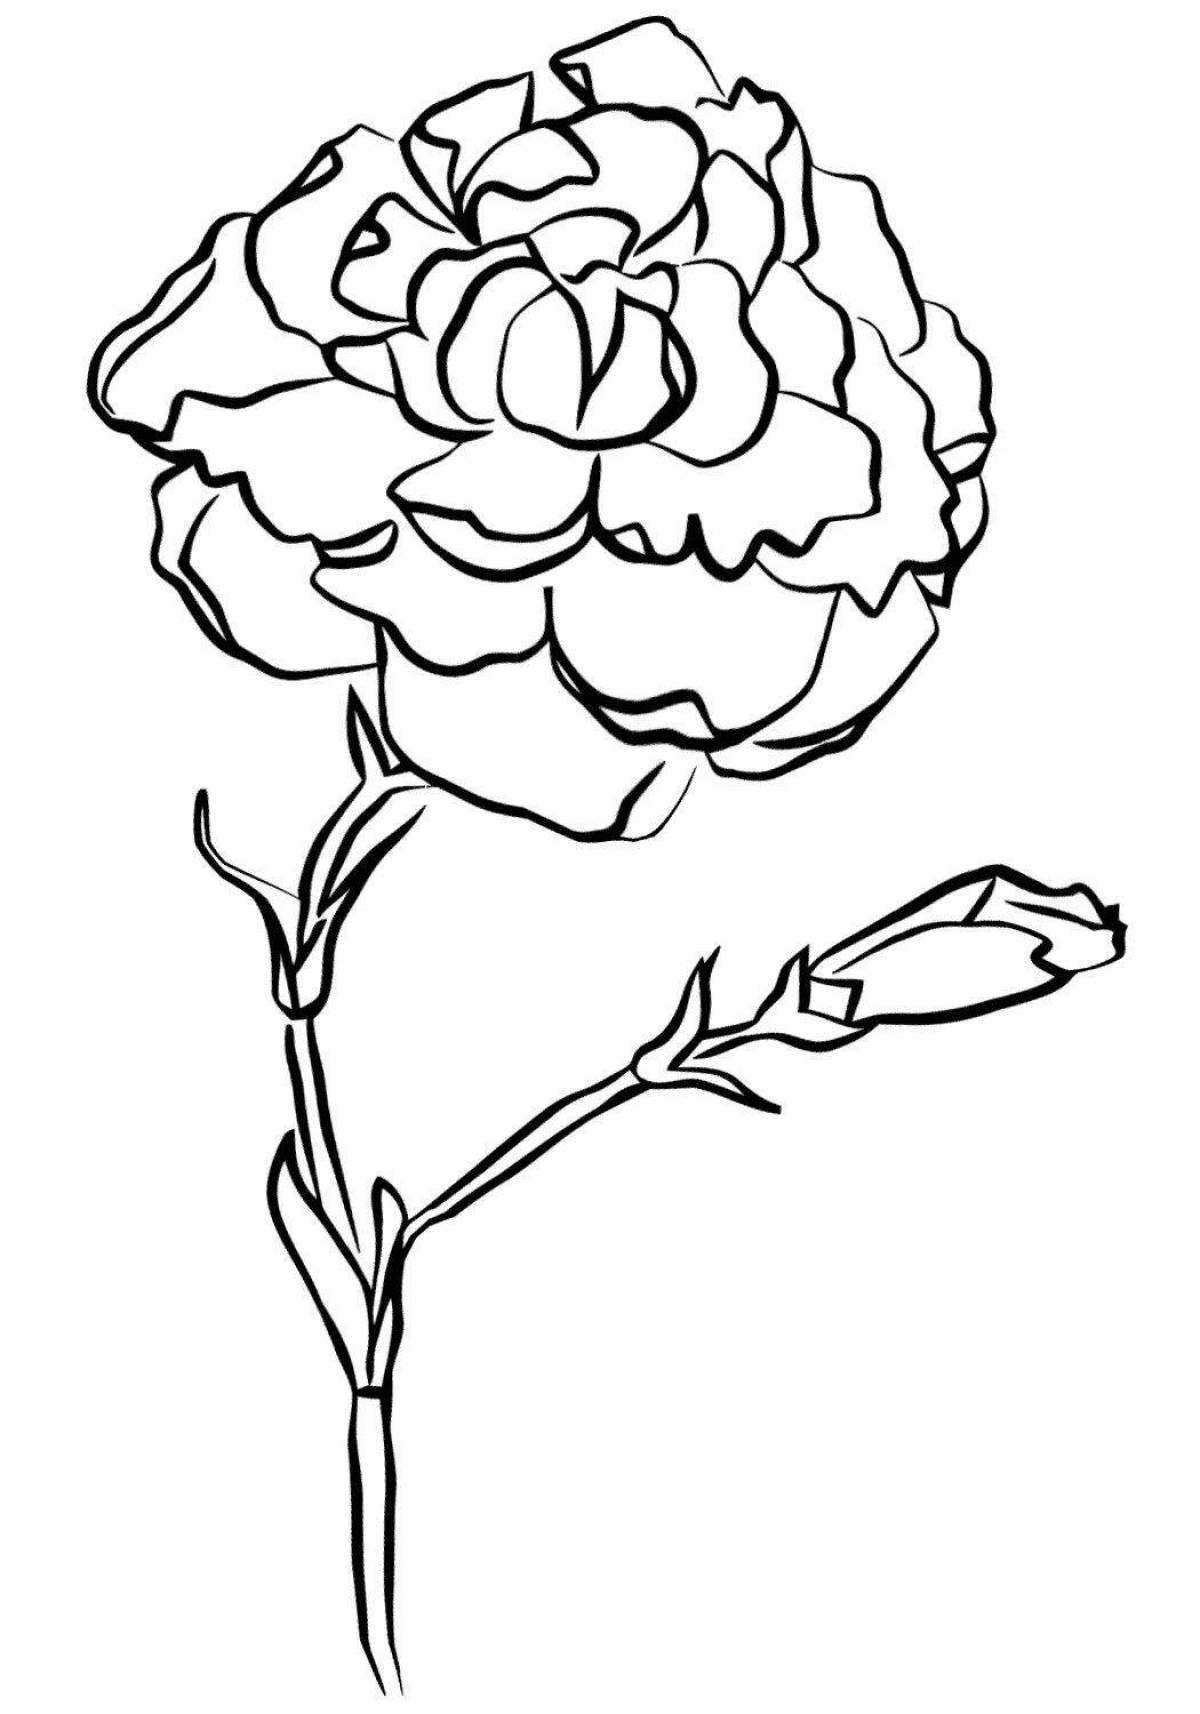 Coloring book with a blooming bouquet of carnations